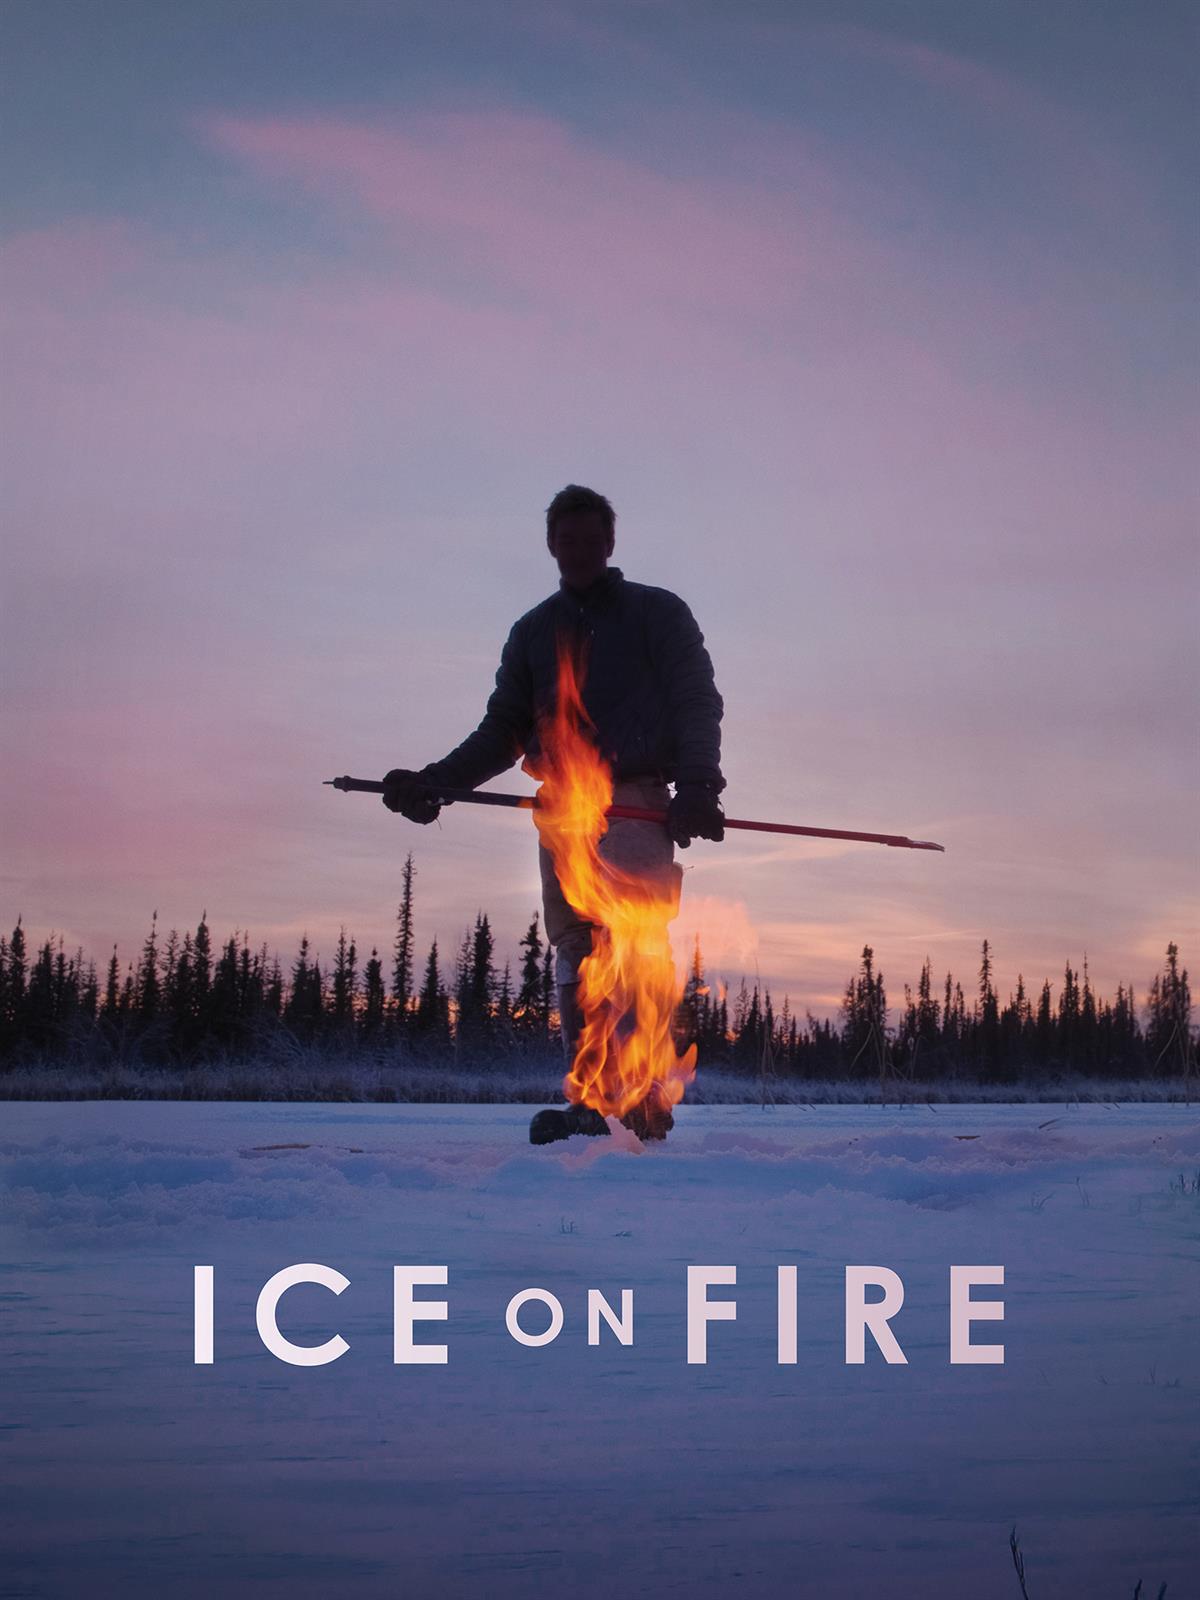 Sky_HBO_IceonFire